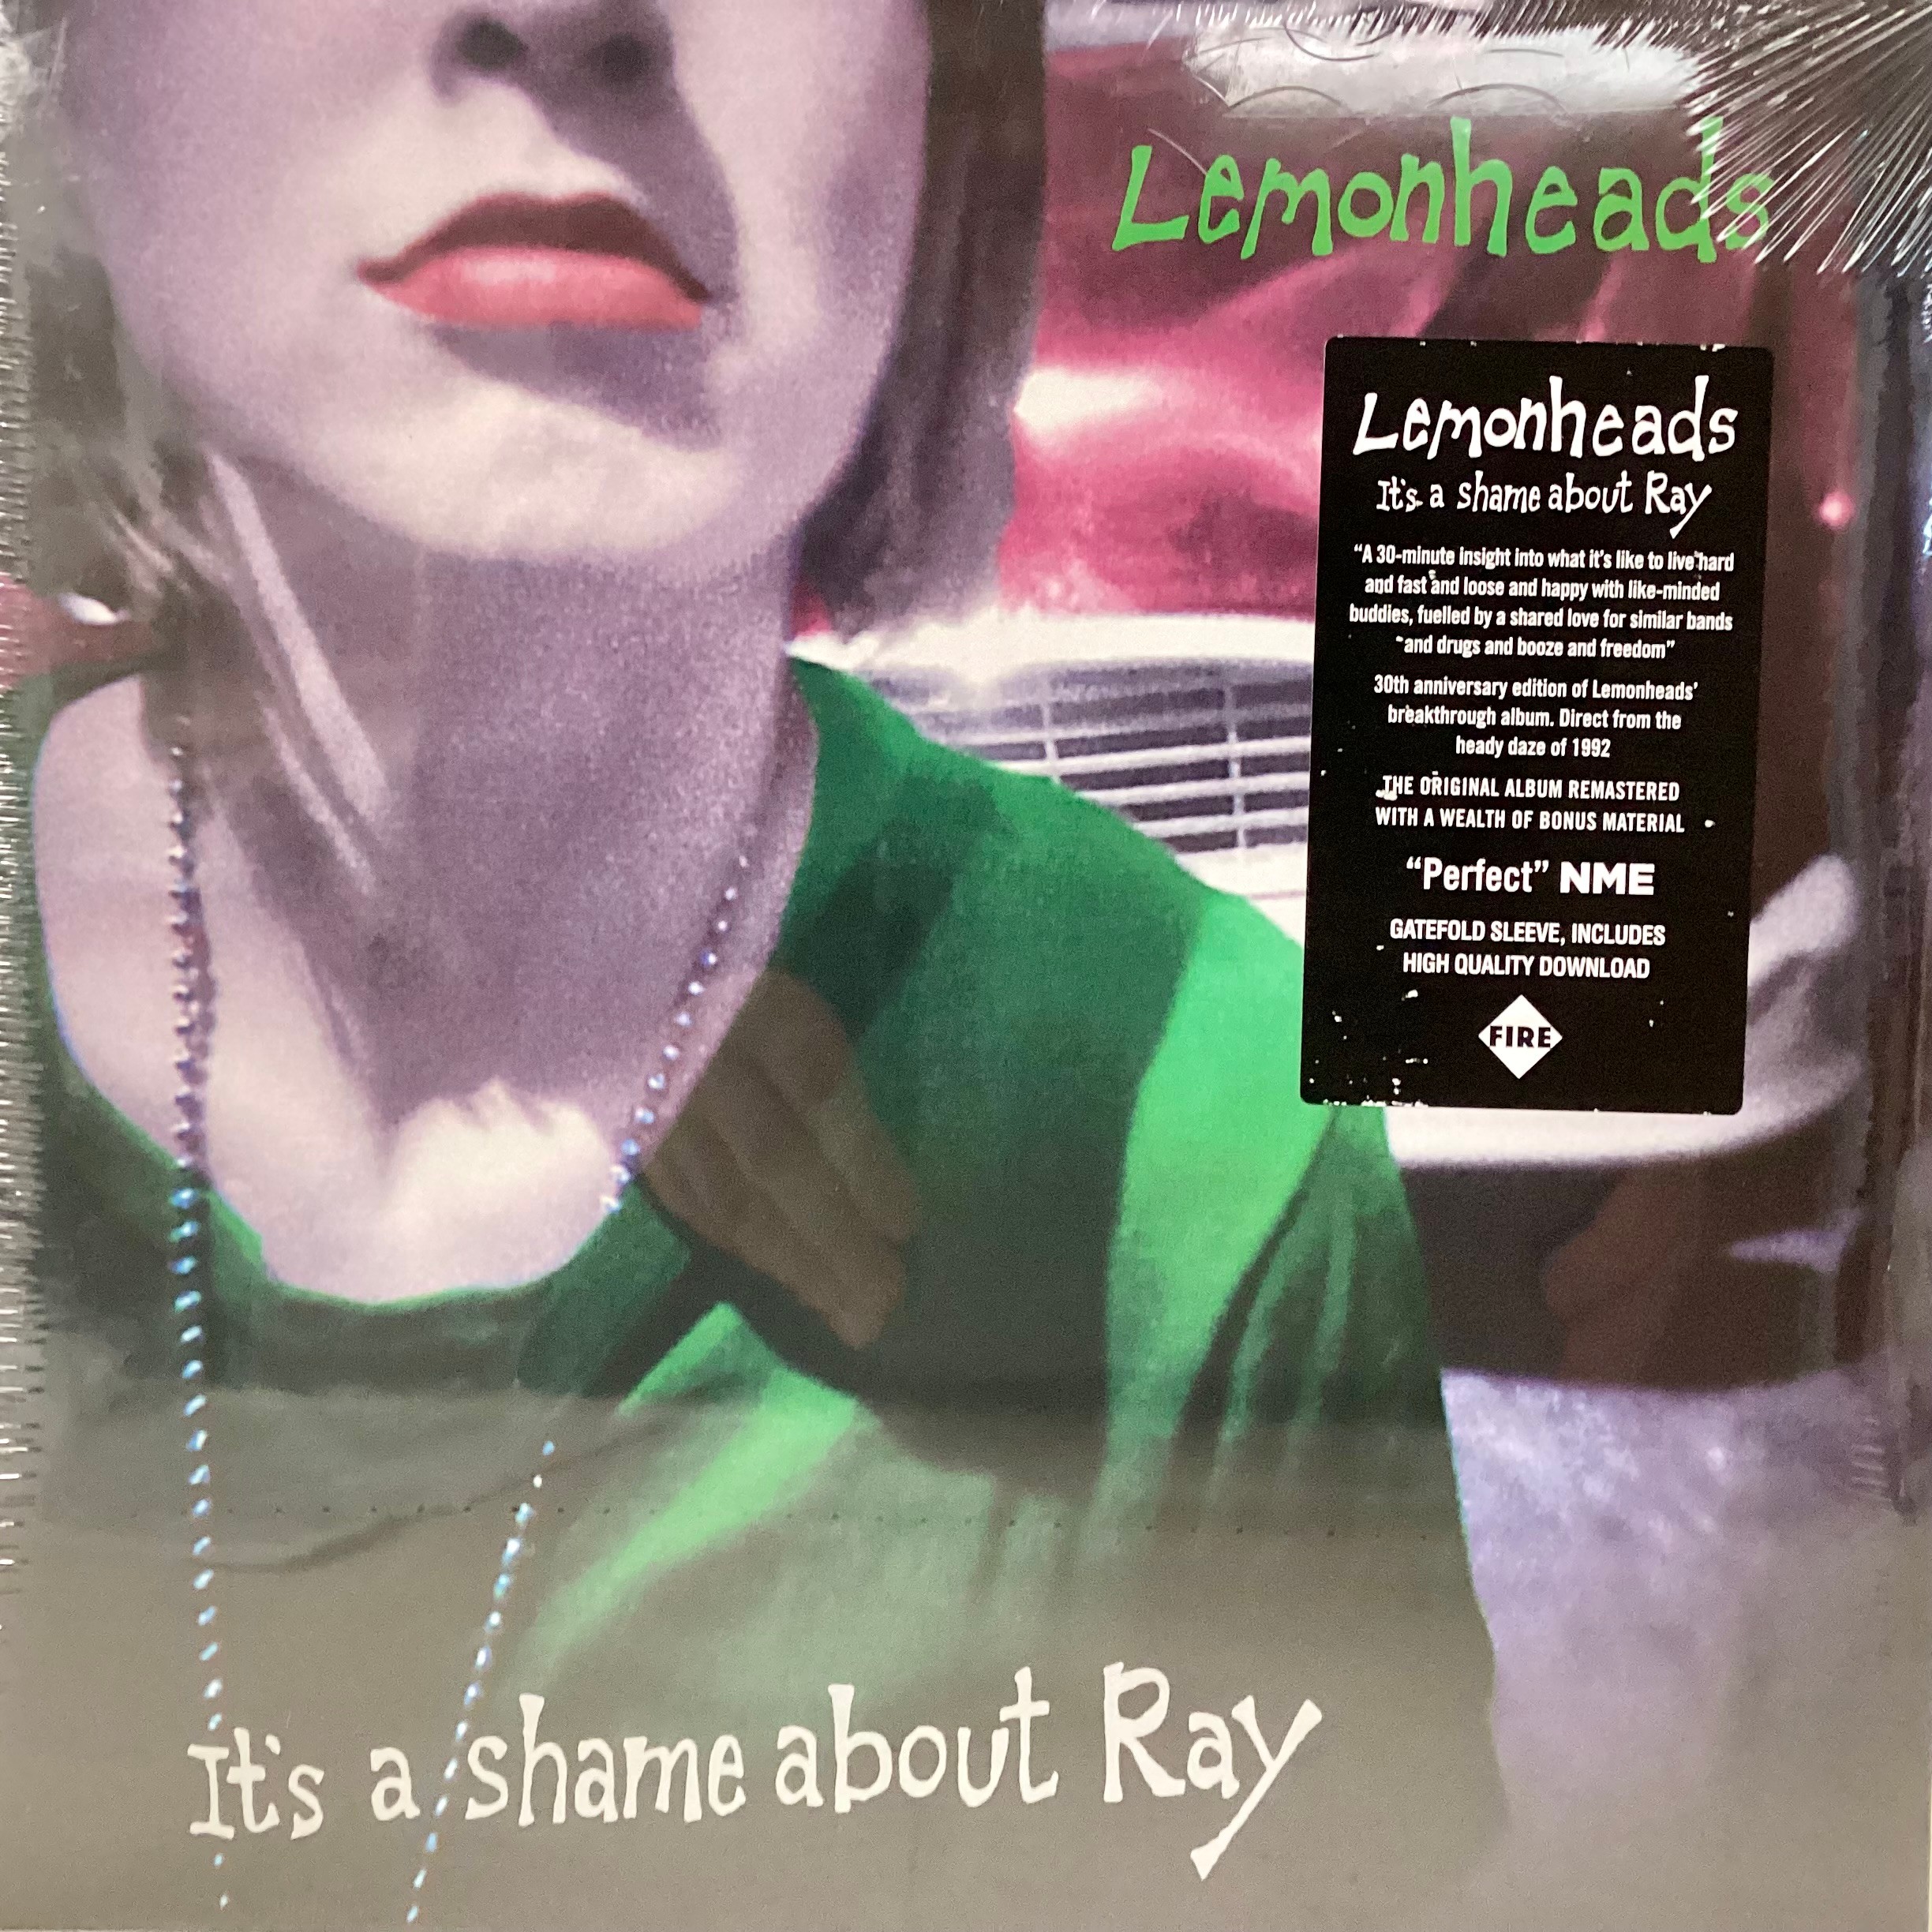 THE LEMONHEADS – IT’S A SHAME ABOUT RAY 30TH ANNIVERSARY VINYL ALBUM. Found here still-factory